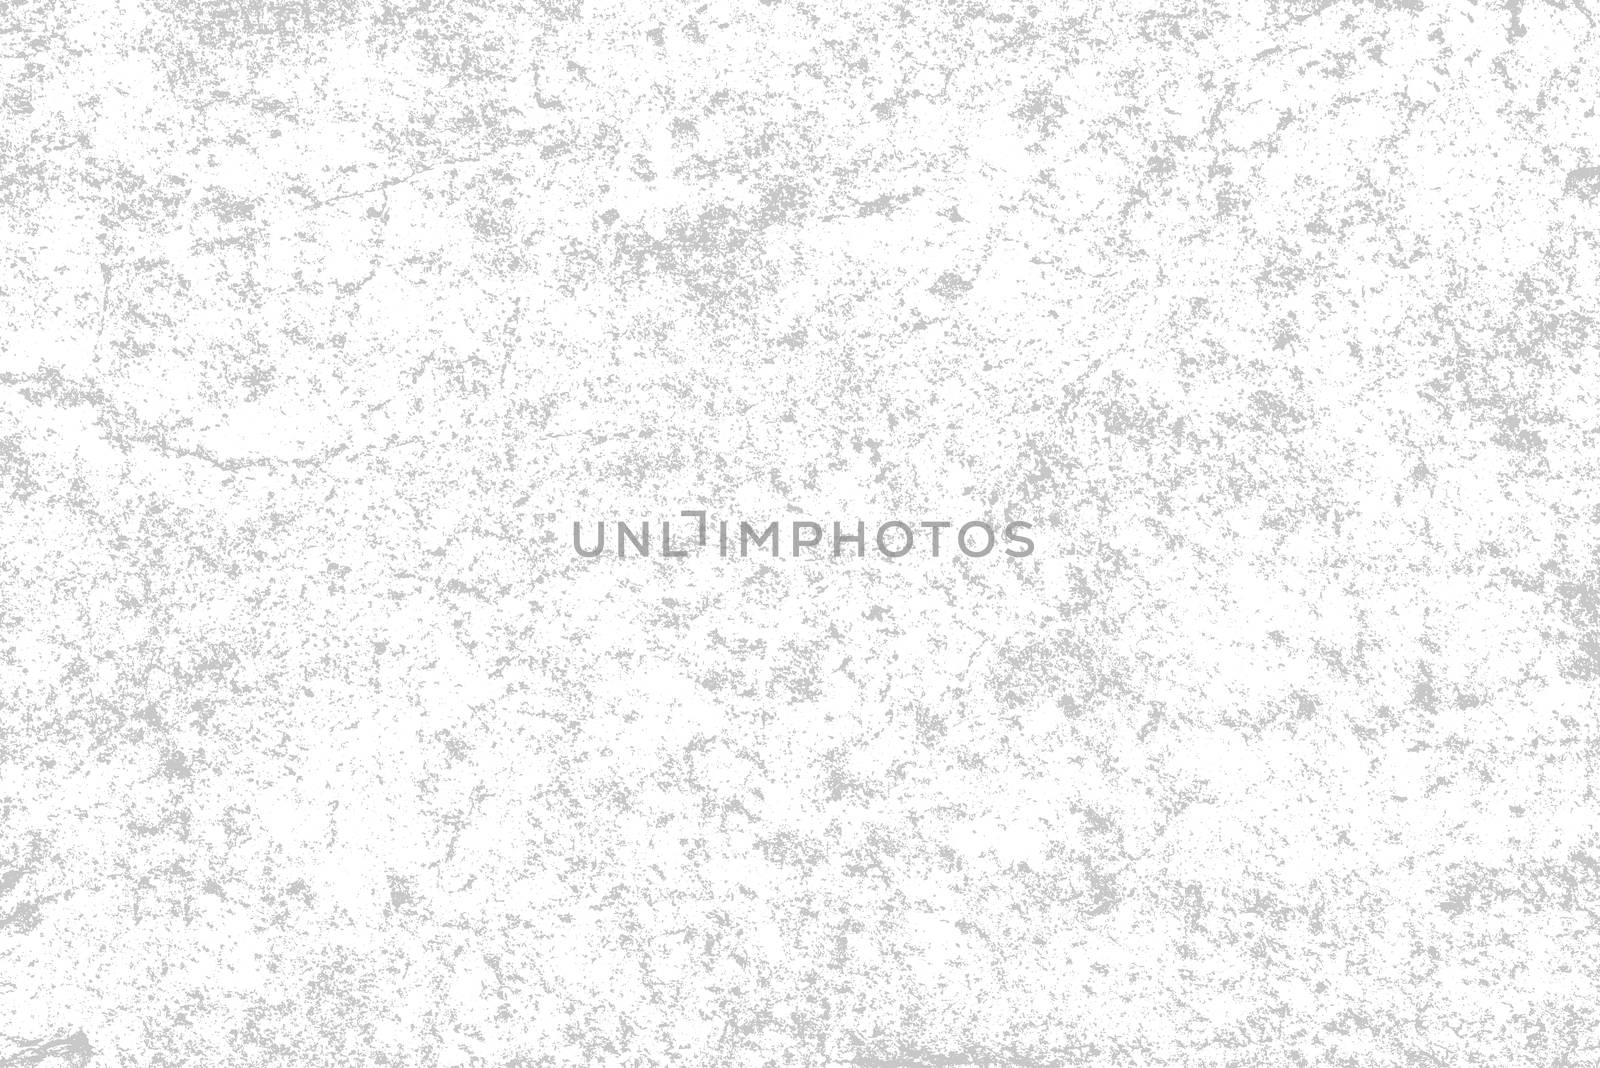 Black and white texture. Abstract white background. Weathered stone surface